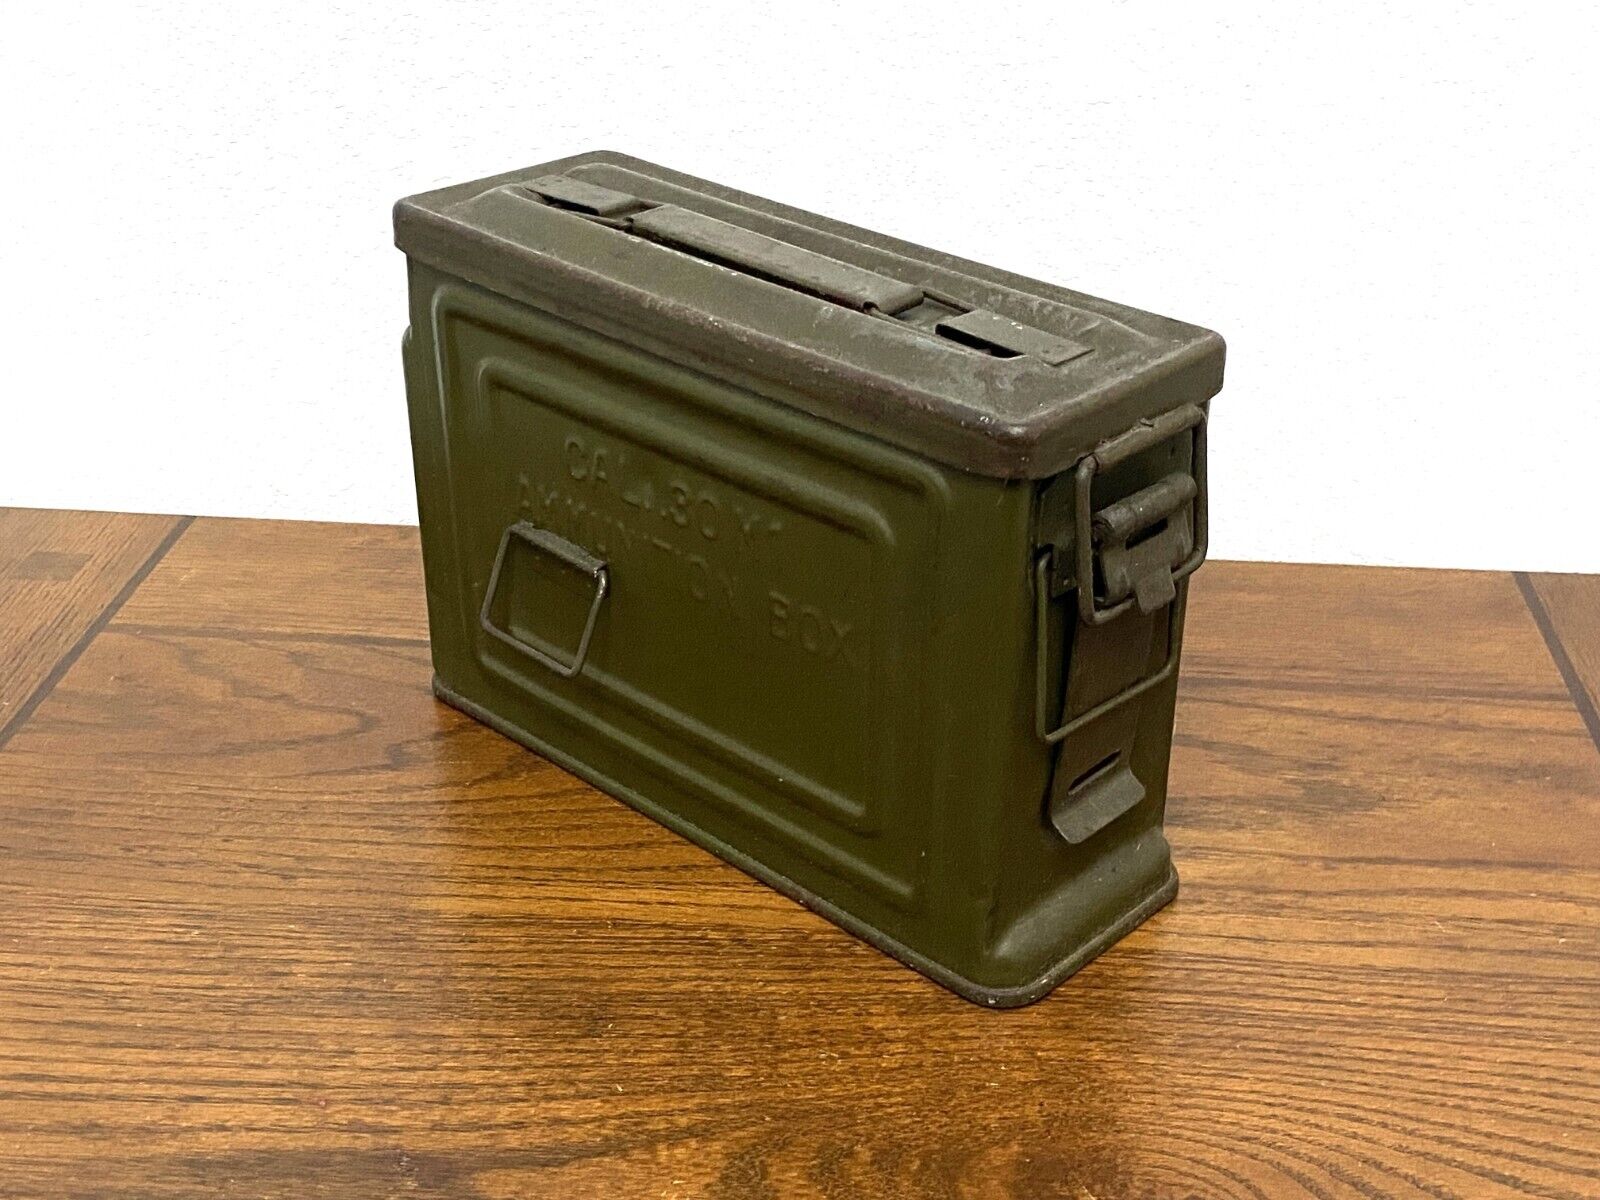 ORIGINAL WWII US MILITARY M1 .30 CAL AMMO CAN with ORIGINAL WWII PAINT